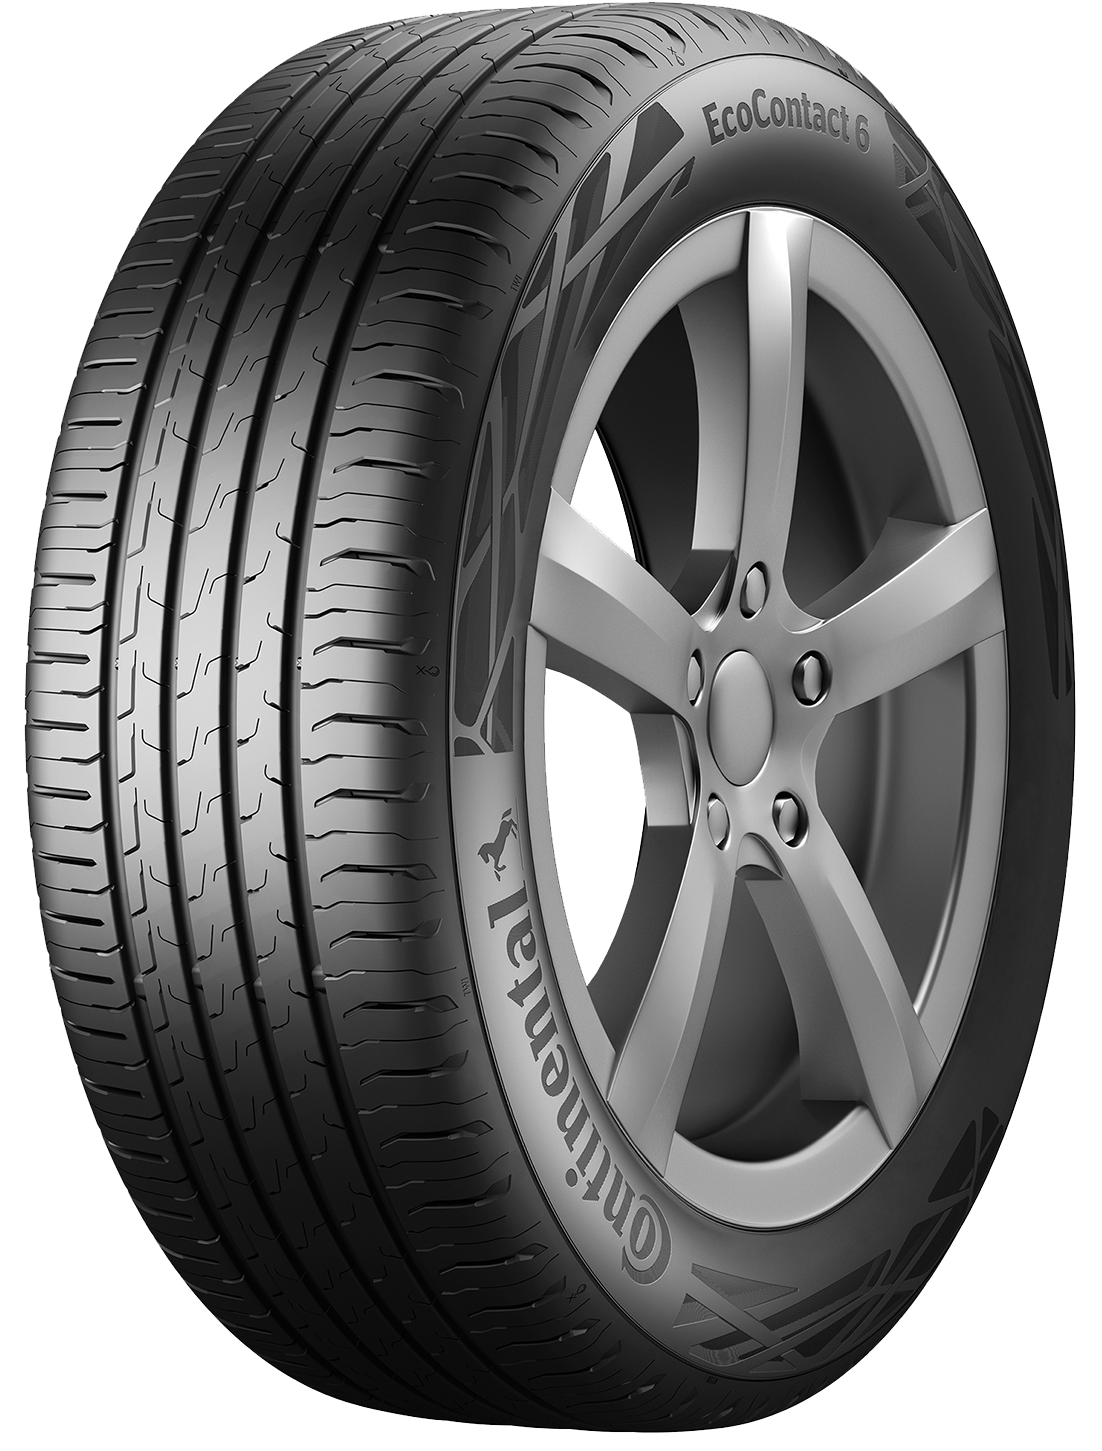 Grip Continental Relies Wet Resistance Stellantis on Tires Ratings for – Both and e-SUVs - AG Continental Top Rolling from for